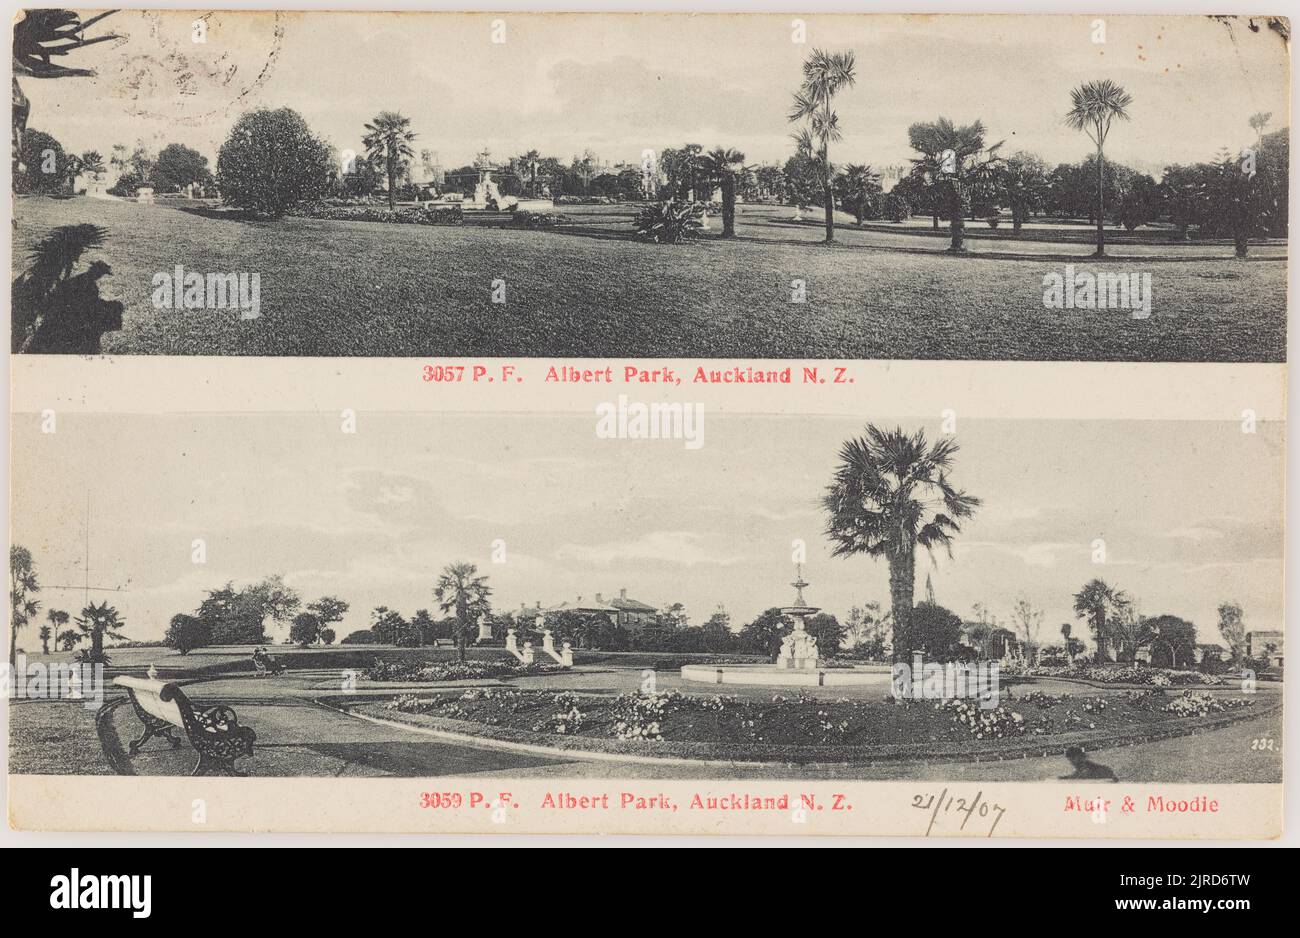 Albert Park, Auckland, N.Z. [two views], circa 1907, by Muir & Moodie, Burton Brothers. Stock Photo